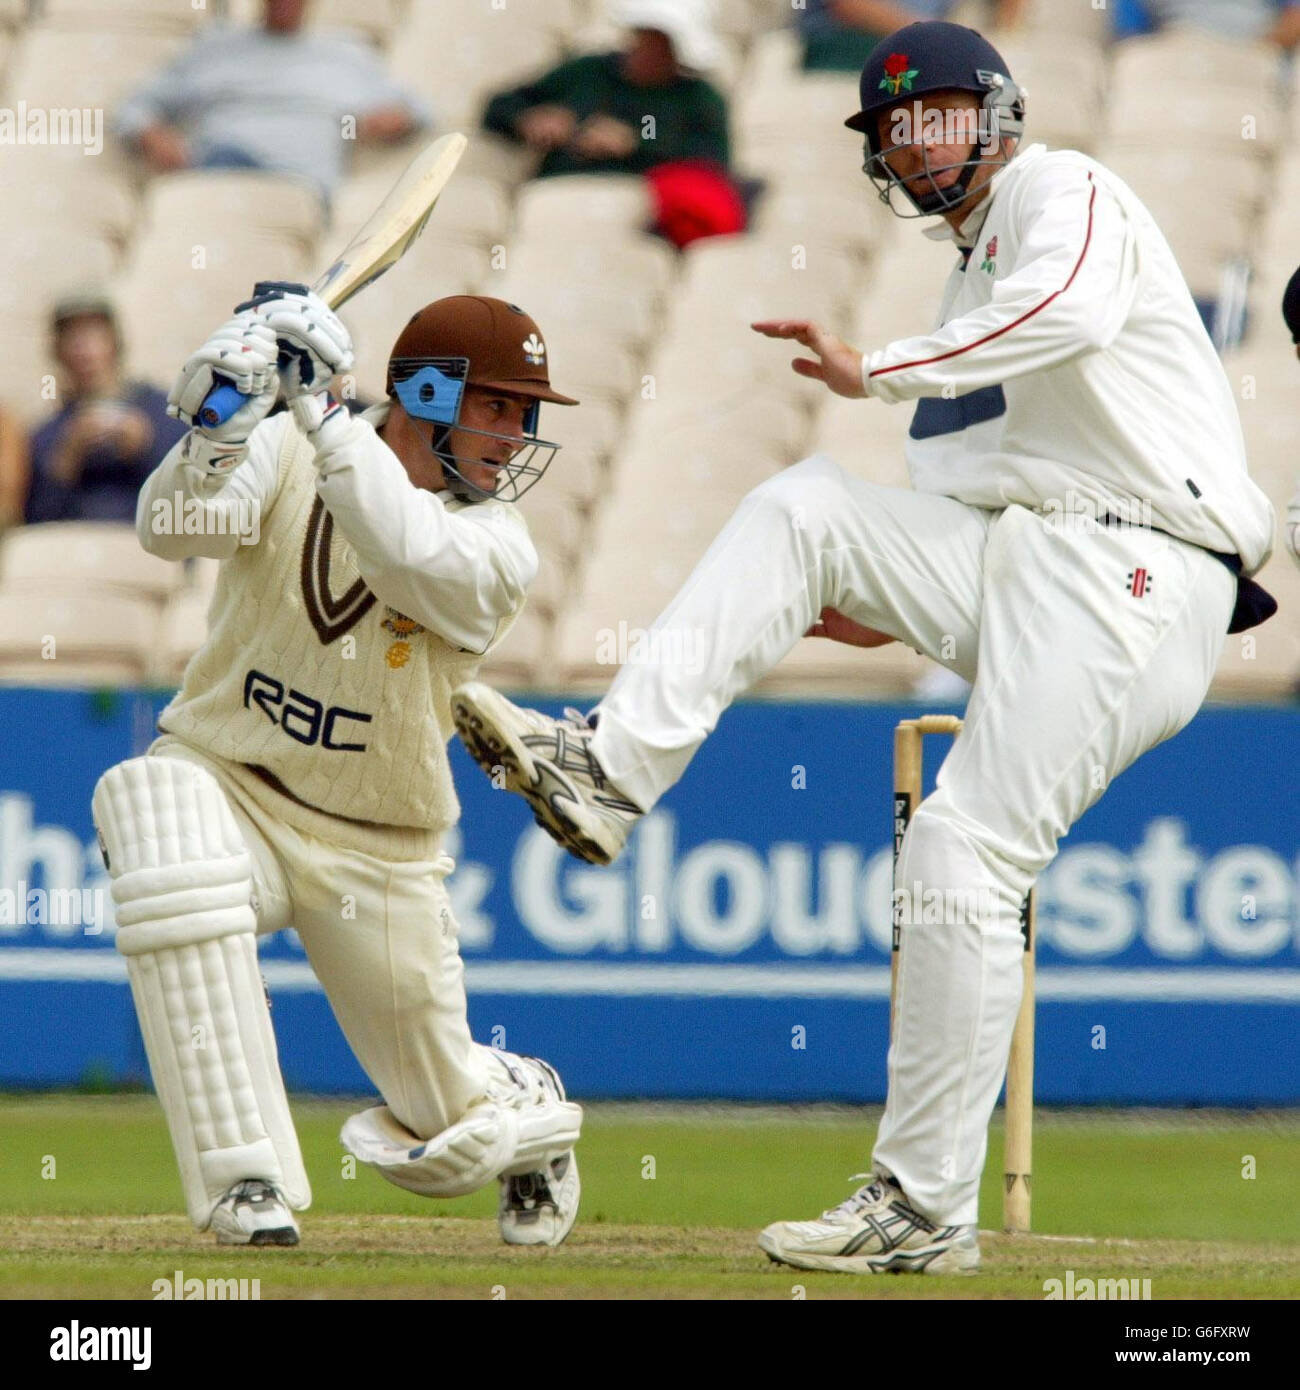 Lancashire fielder Iain Sutcliffe (right) takes evasive action as Surrey batsman Graham Thorpe unleashes a square drive off the bowling of Carl Hooper on the opening day of the Frizzell County Championship match at Old Trafford, Lancashire, Tuesday August 26, 2003. Stock Photo